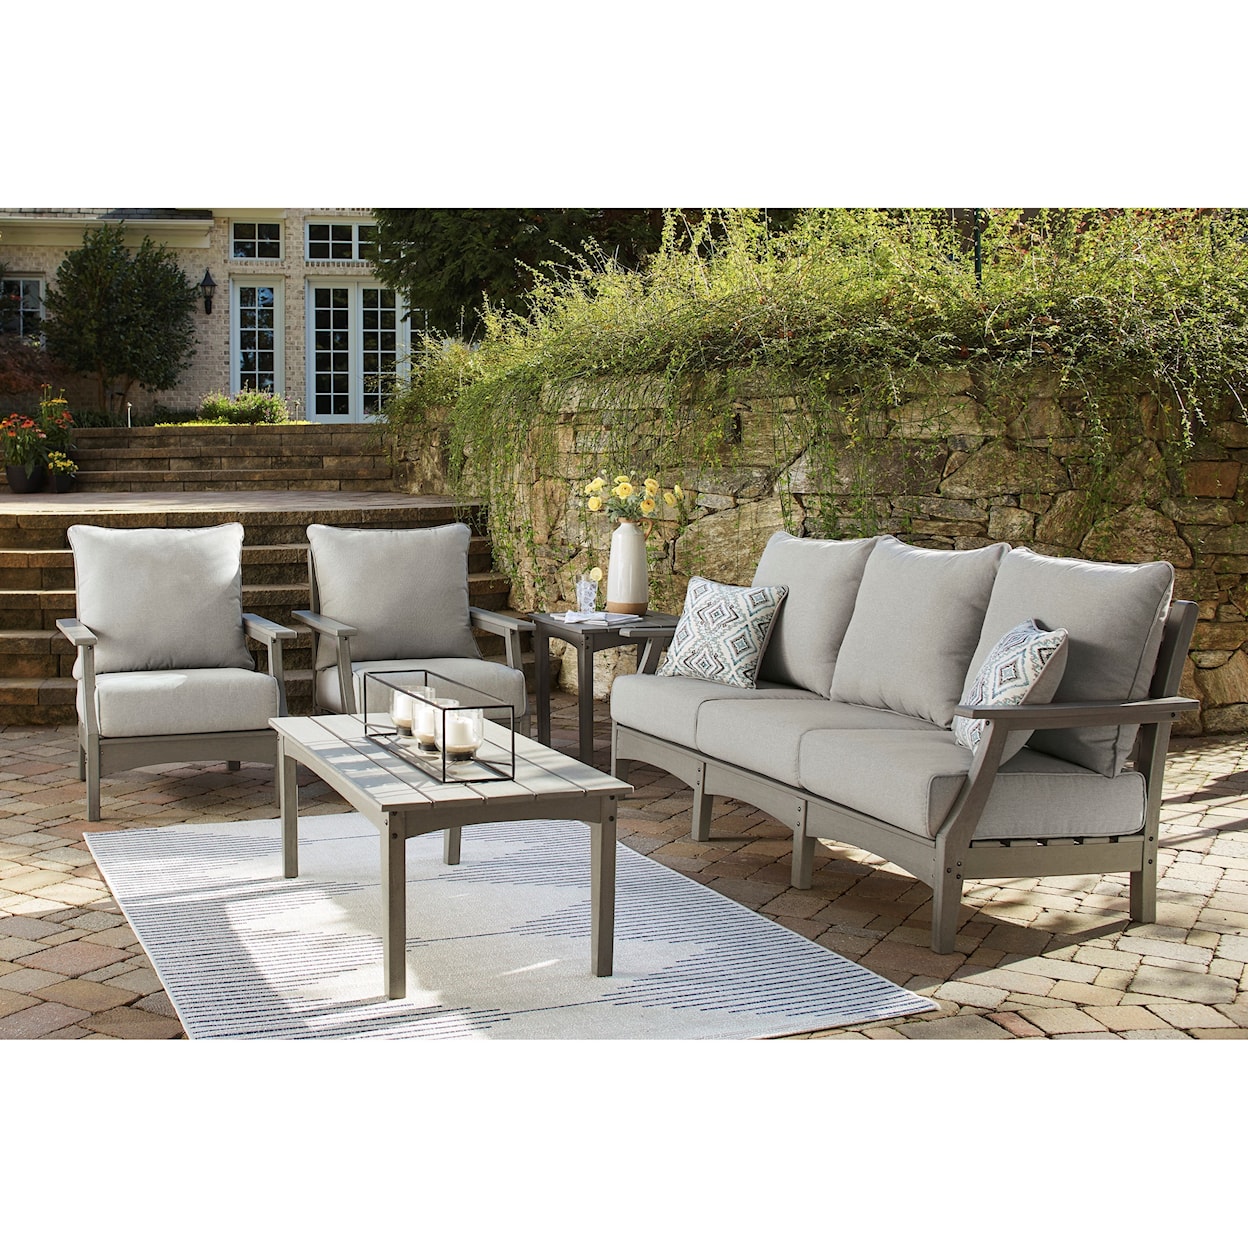 Signature Visola Outdoor Sofa, 2 Chairs, and Table Set